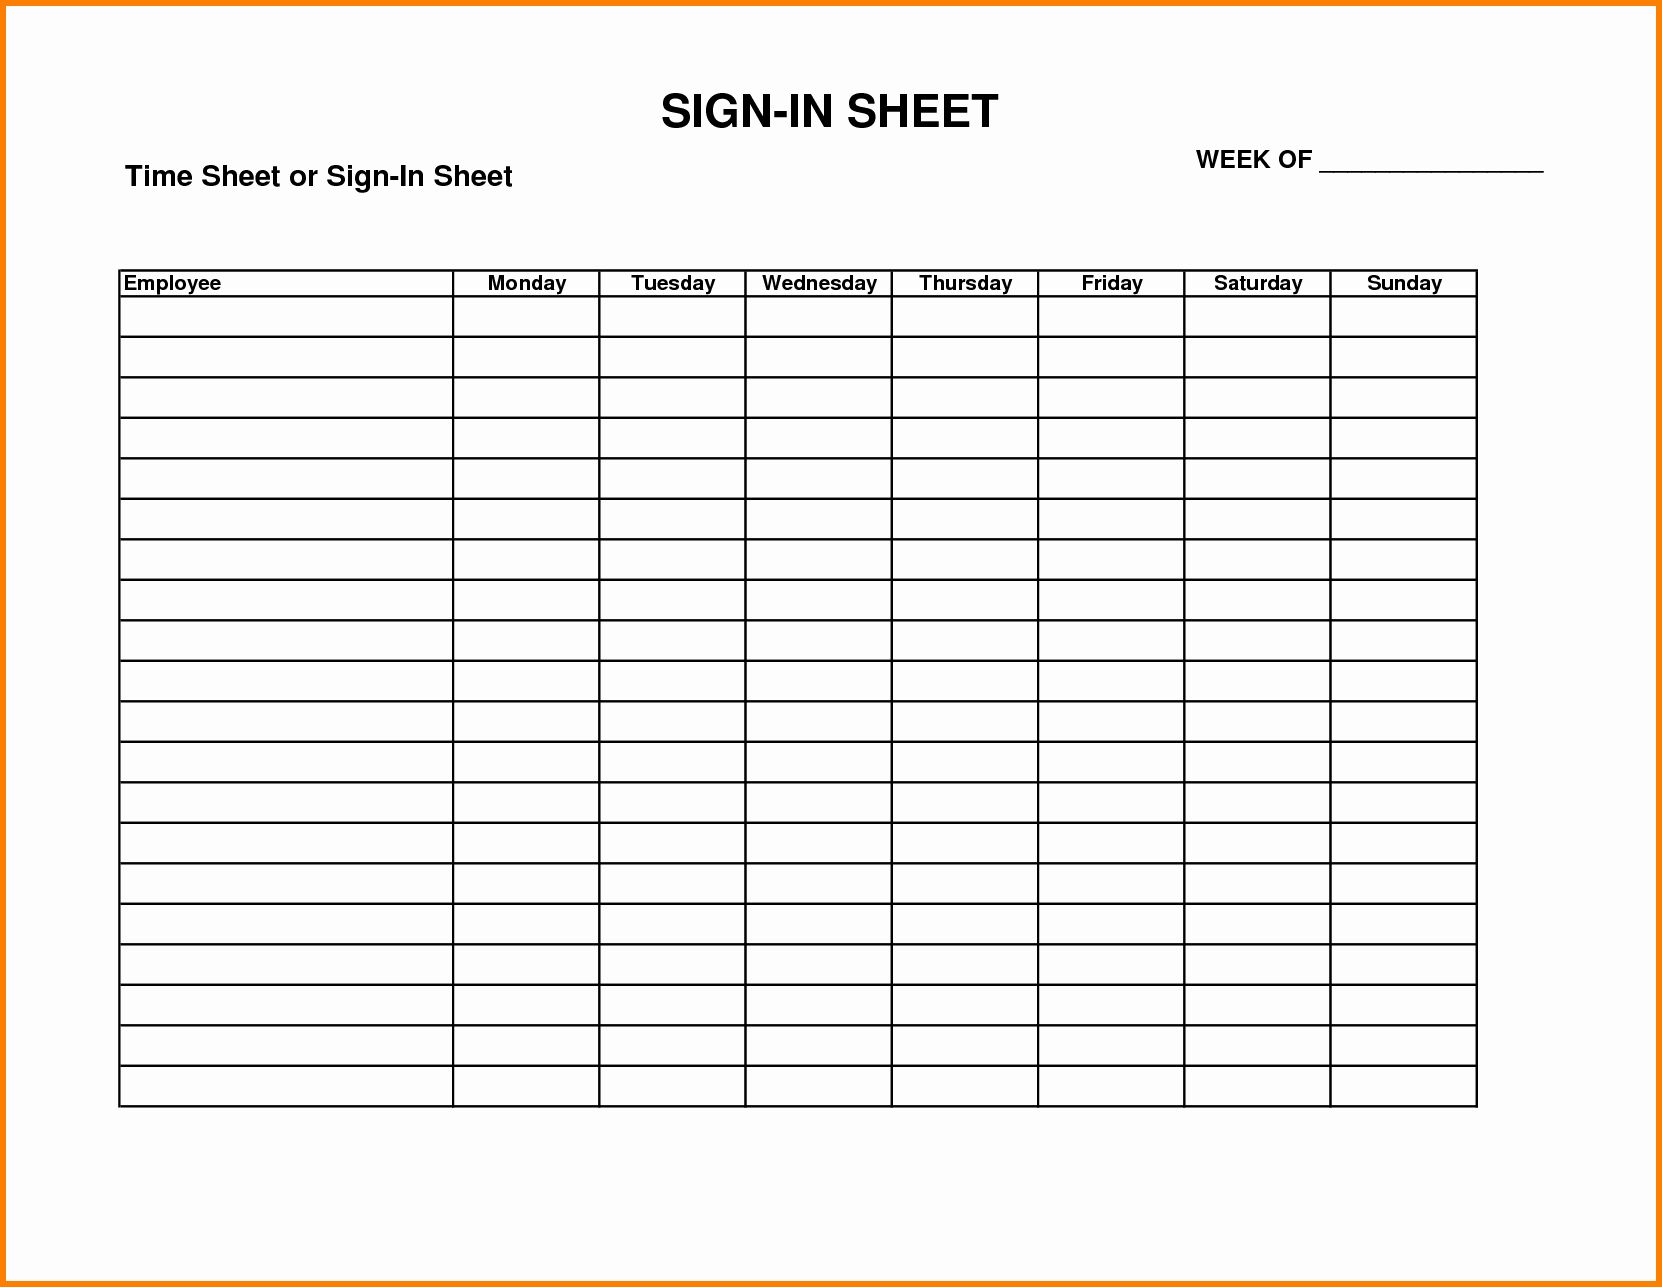 Employees Sign In Sheet New Sign In Timesheet Idealstalist